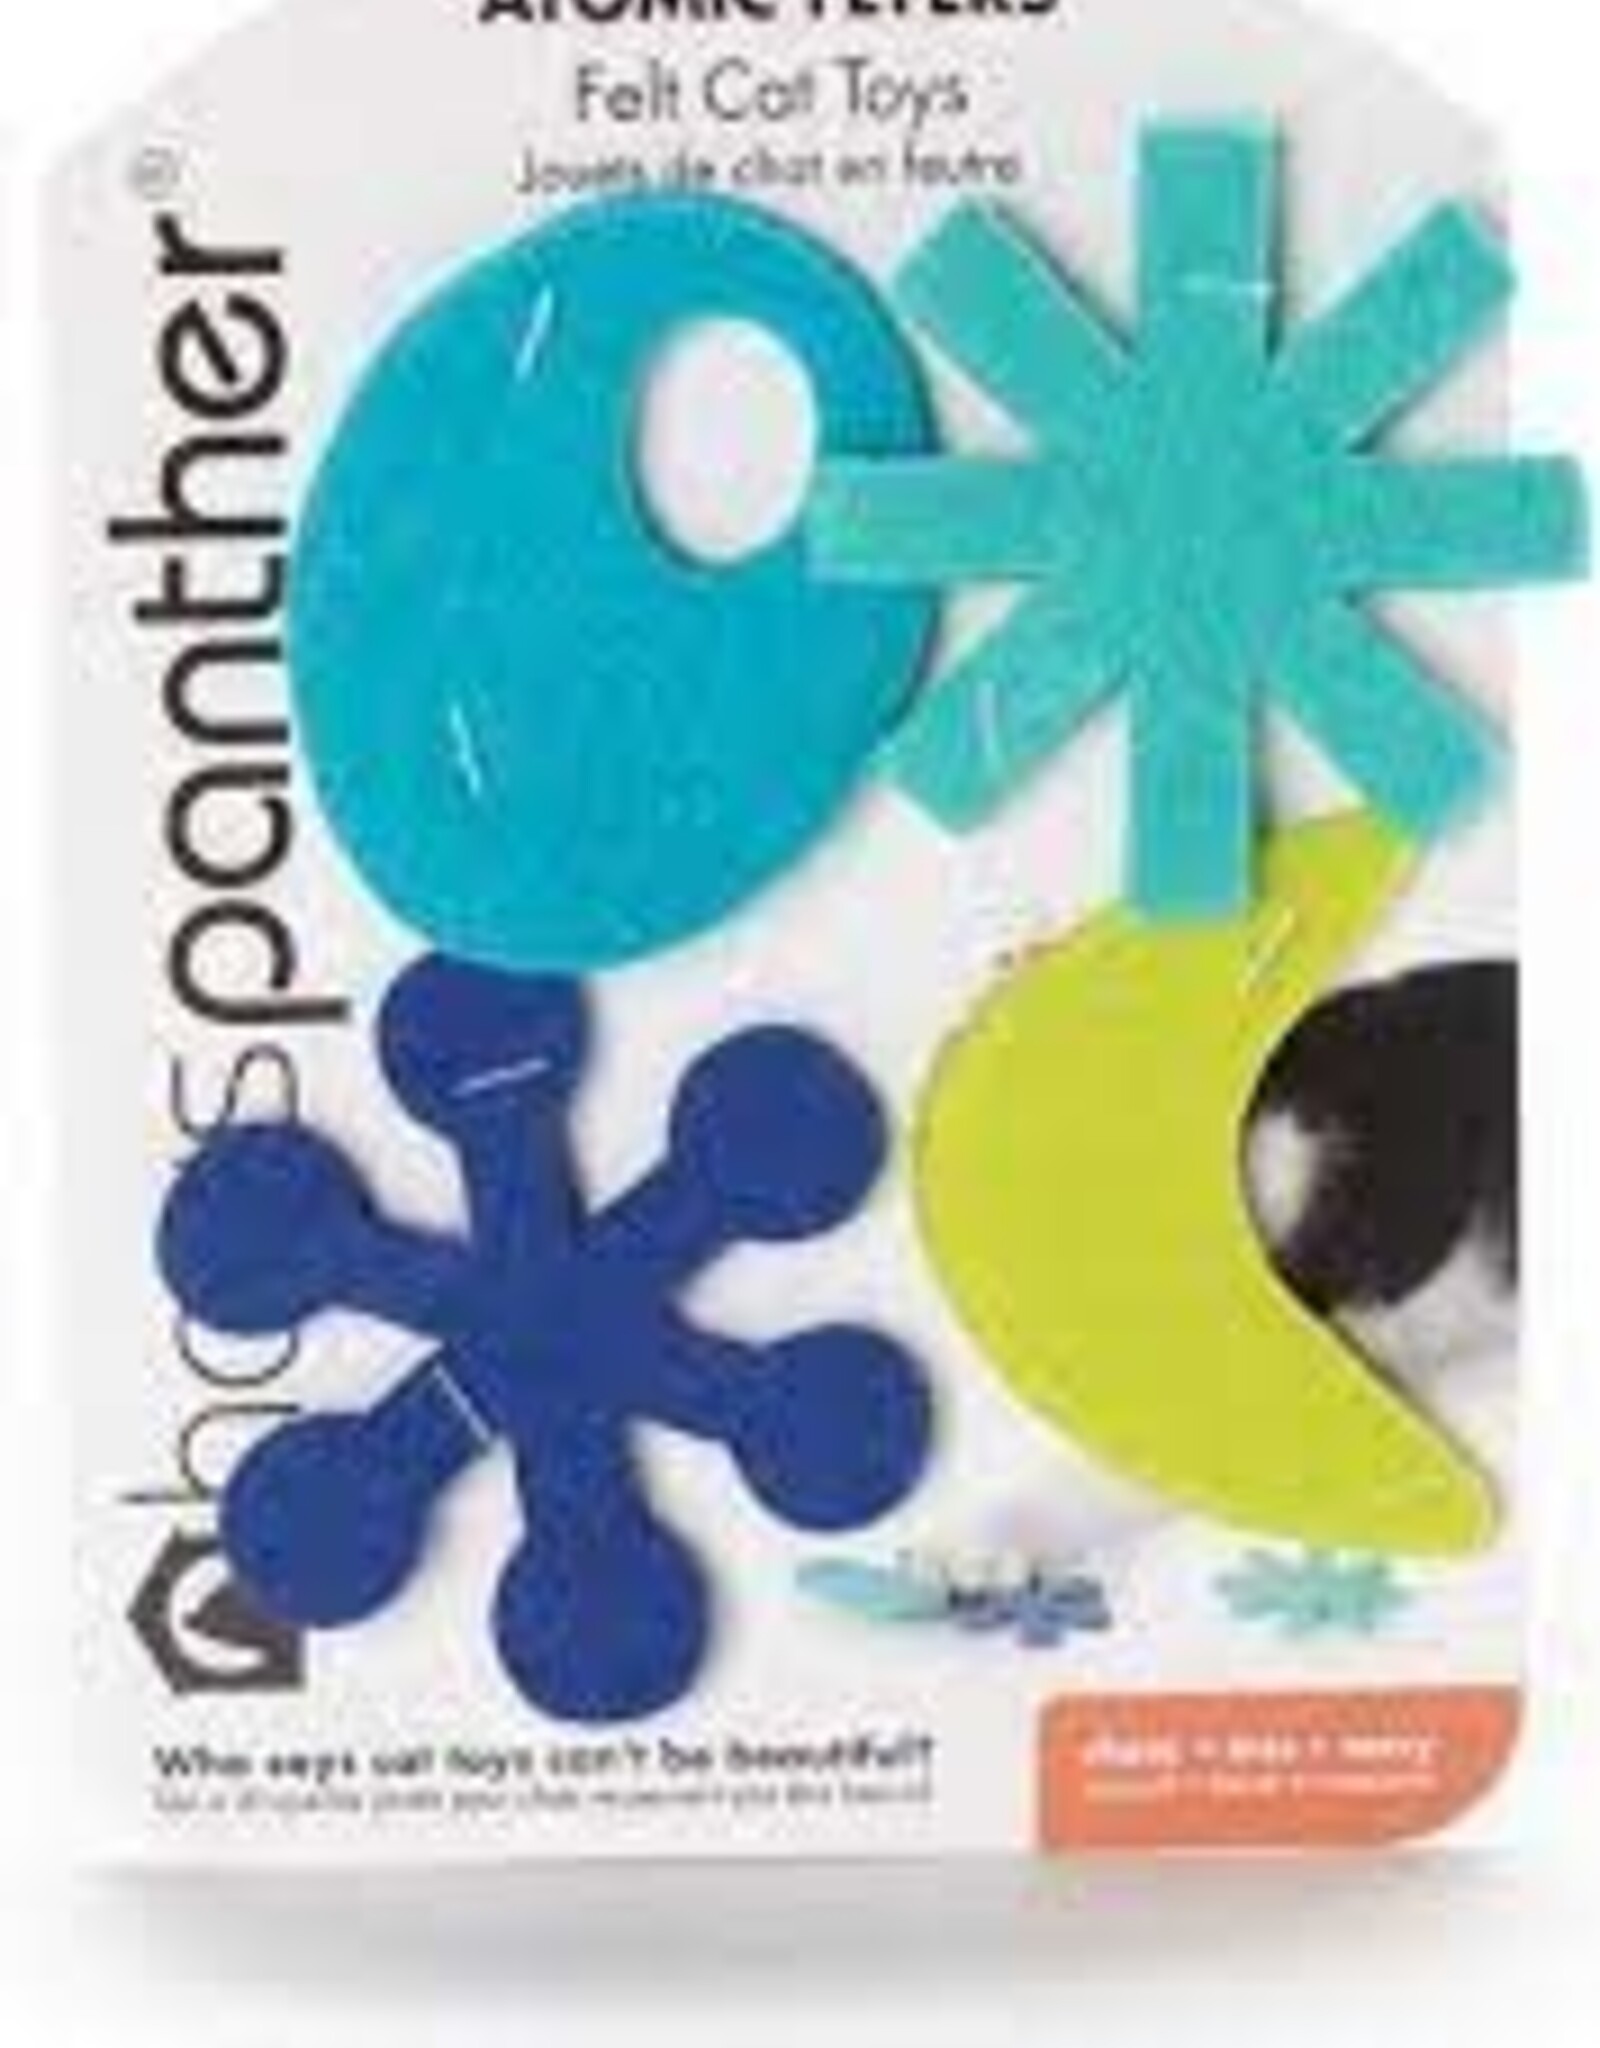 Hauspanther Hauspanther Atomic Flyers Cat Toy Ocean 4 Pack